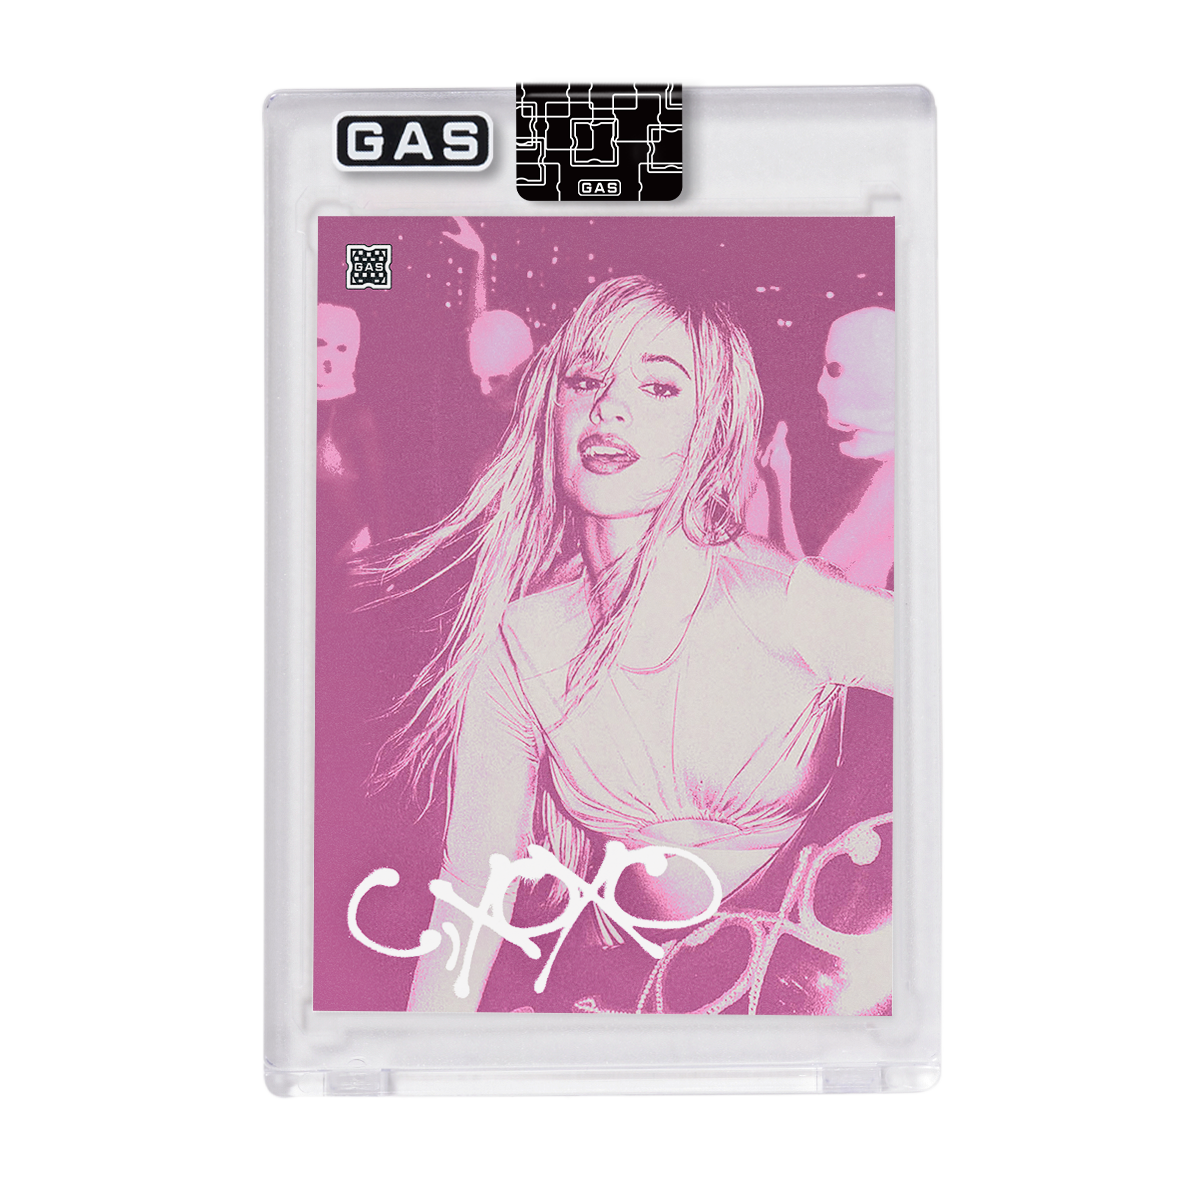 C,XOXO GAS TRADING CARD FRONT HOT PINK